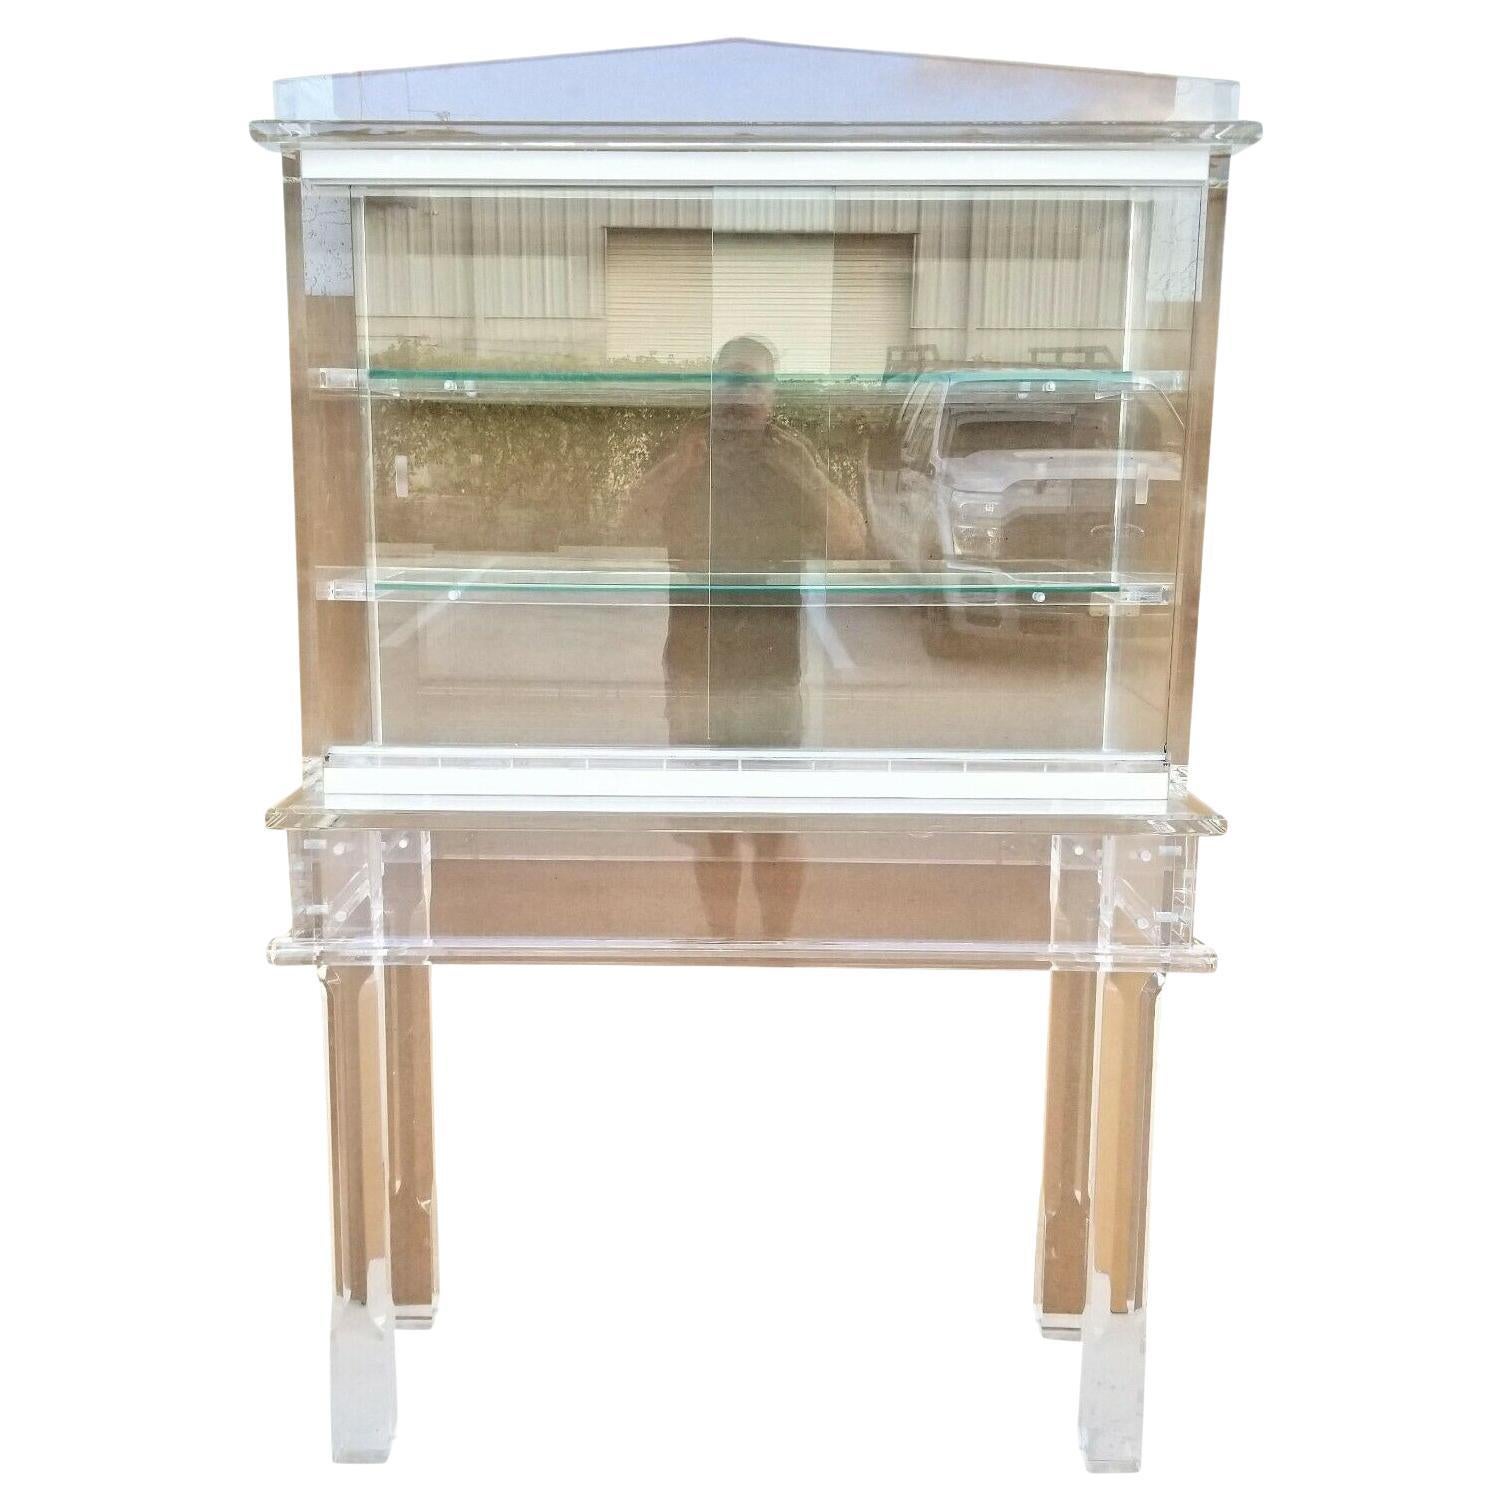 Offering One Of Our Recent Palm Beach Estate Fine Furniture Acquisitions Of A Custom Made 1970's Exceptional Huge MCM Neo-Classical Hollywood Regency Style Lucite 2 Piece Dry Bar Display Cabinet 
Featuring 2 thick glass shelves and 2 sliding front